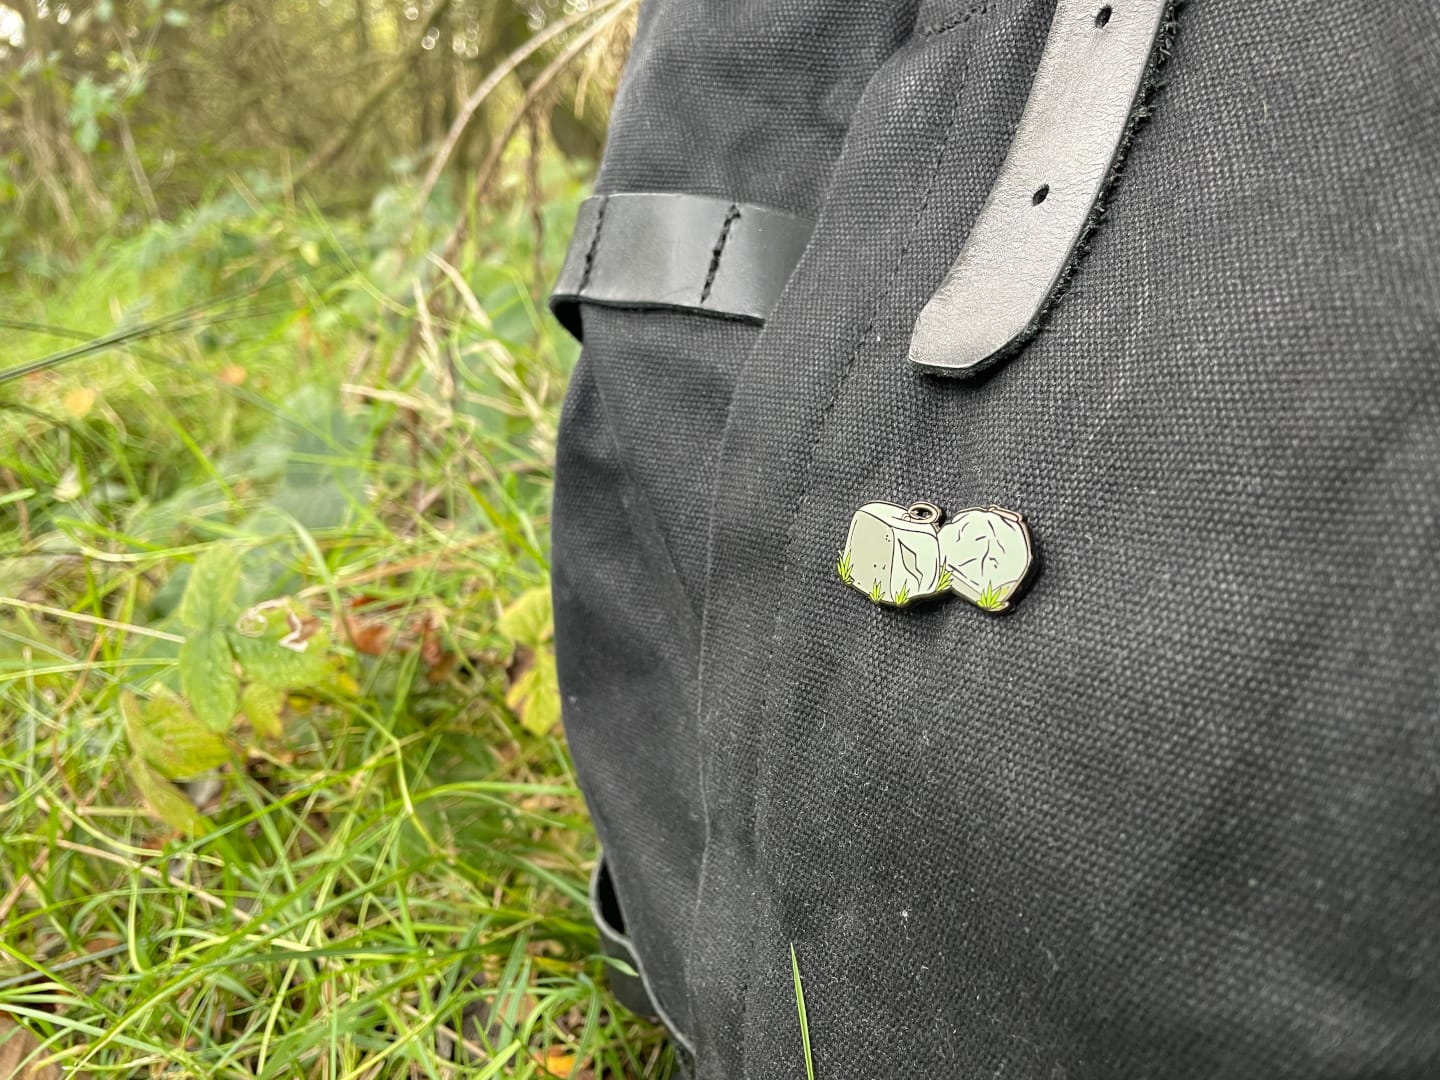 A Dinnie Stones enamel pin on a black backpack outdoors.